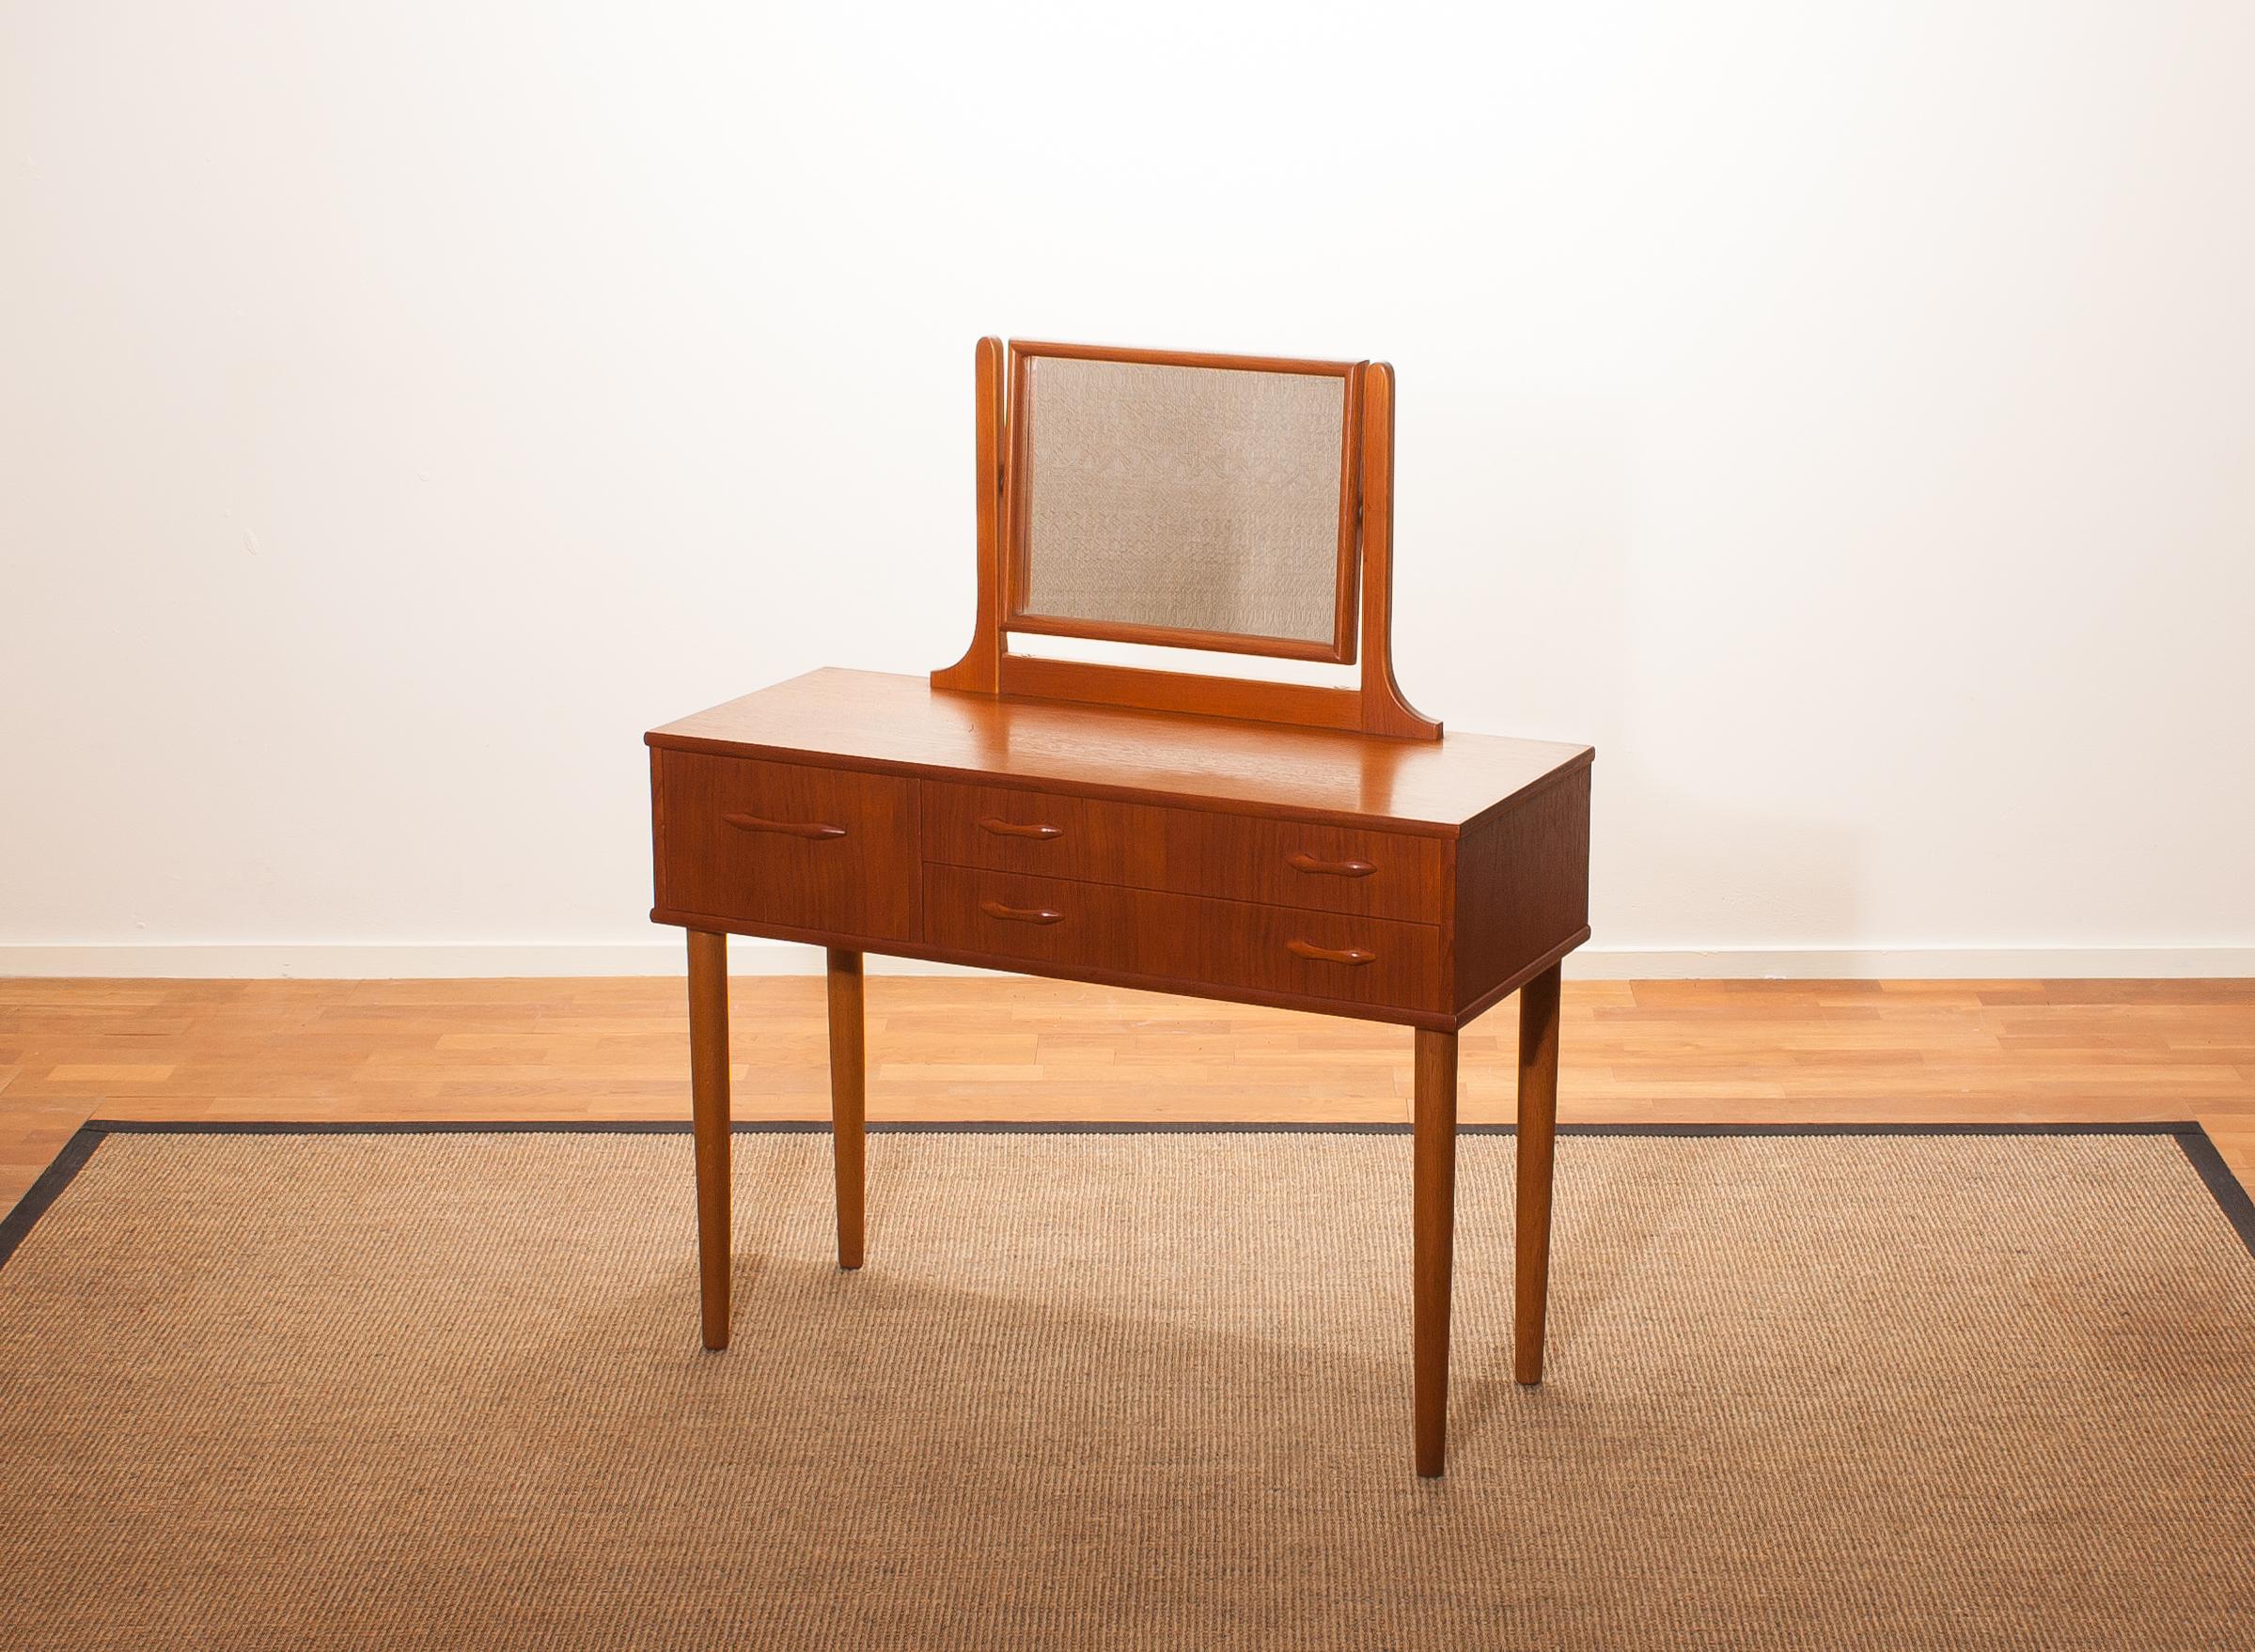 Beautiful dressing table by Ulferts Sweden.
This dressing table is made of teak and consists of three drawers and a mirror.
It is in wonderful condition.
Period 1950s
Dimensions: H. 111 cm (including mirror, the height of the table top 72